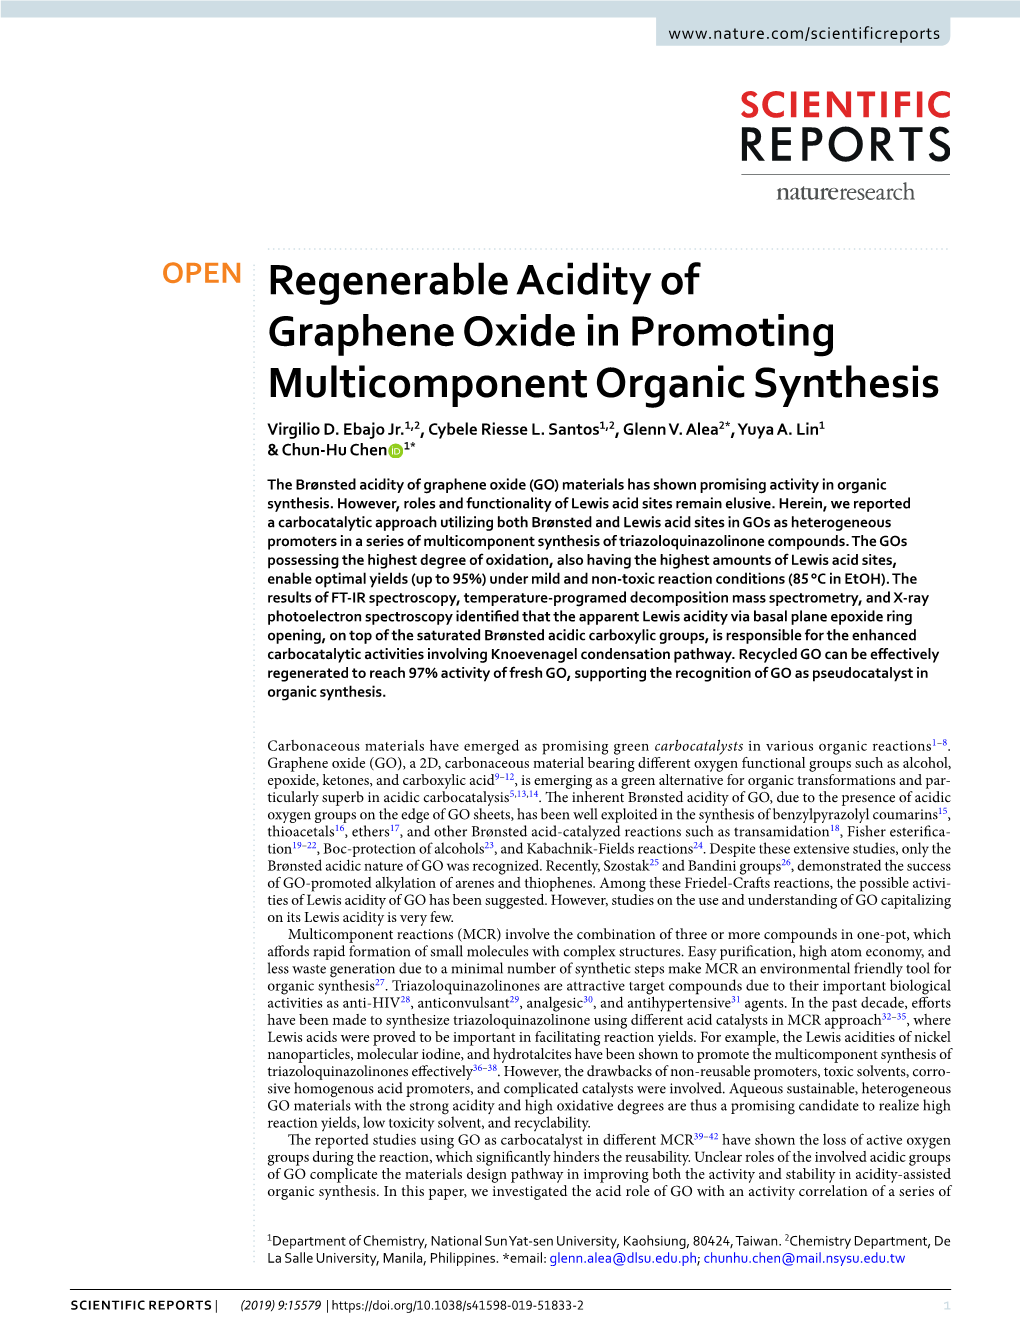 Regenerable Acidity of Graphene Oxide in Promoting Multicomponent Organic Synthesis Virgilio D